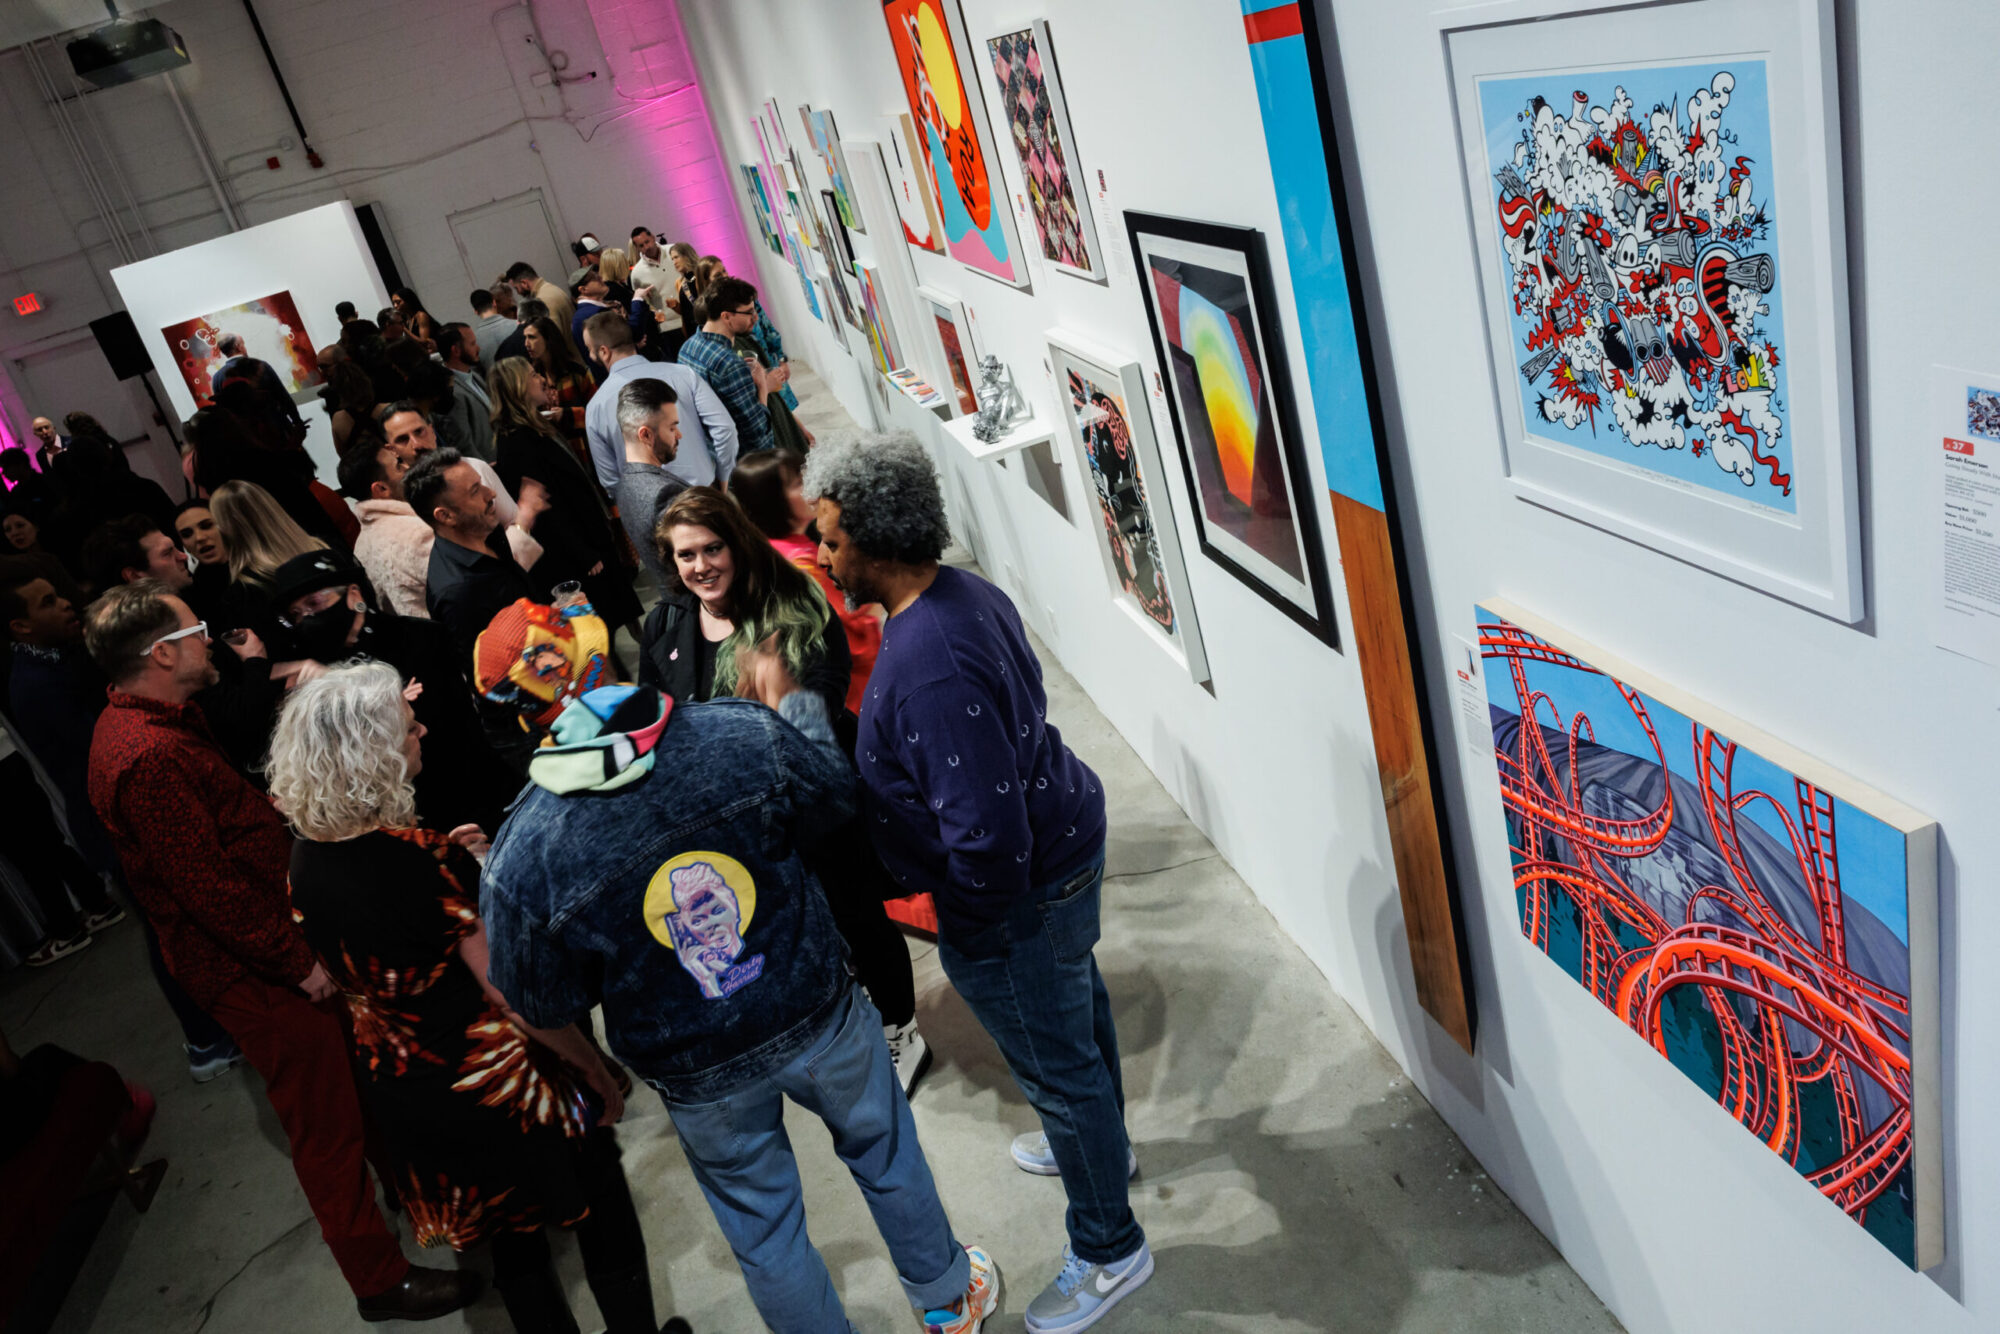 Image of a crowd of people gathering next to a wall of a variety of framed art pieces.